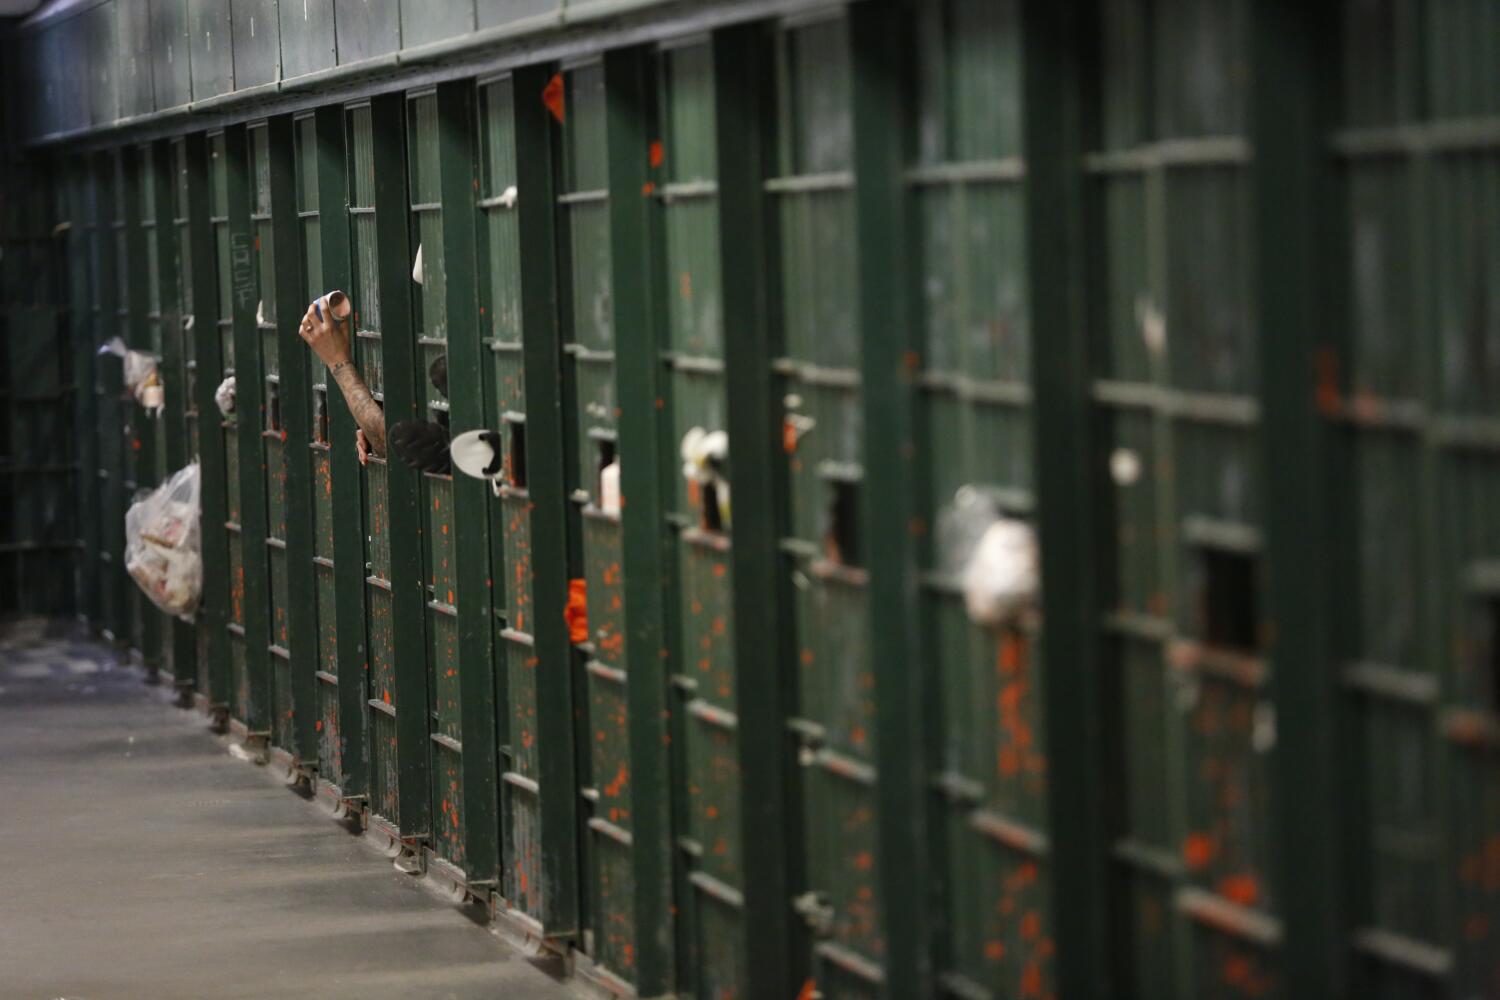 13 charged in Mexican Mafia collection racket in L.A. County jails